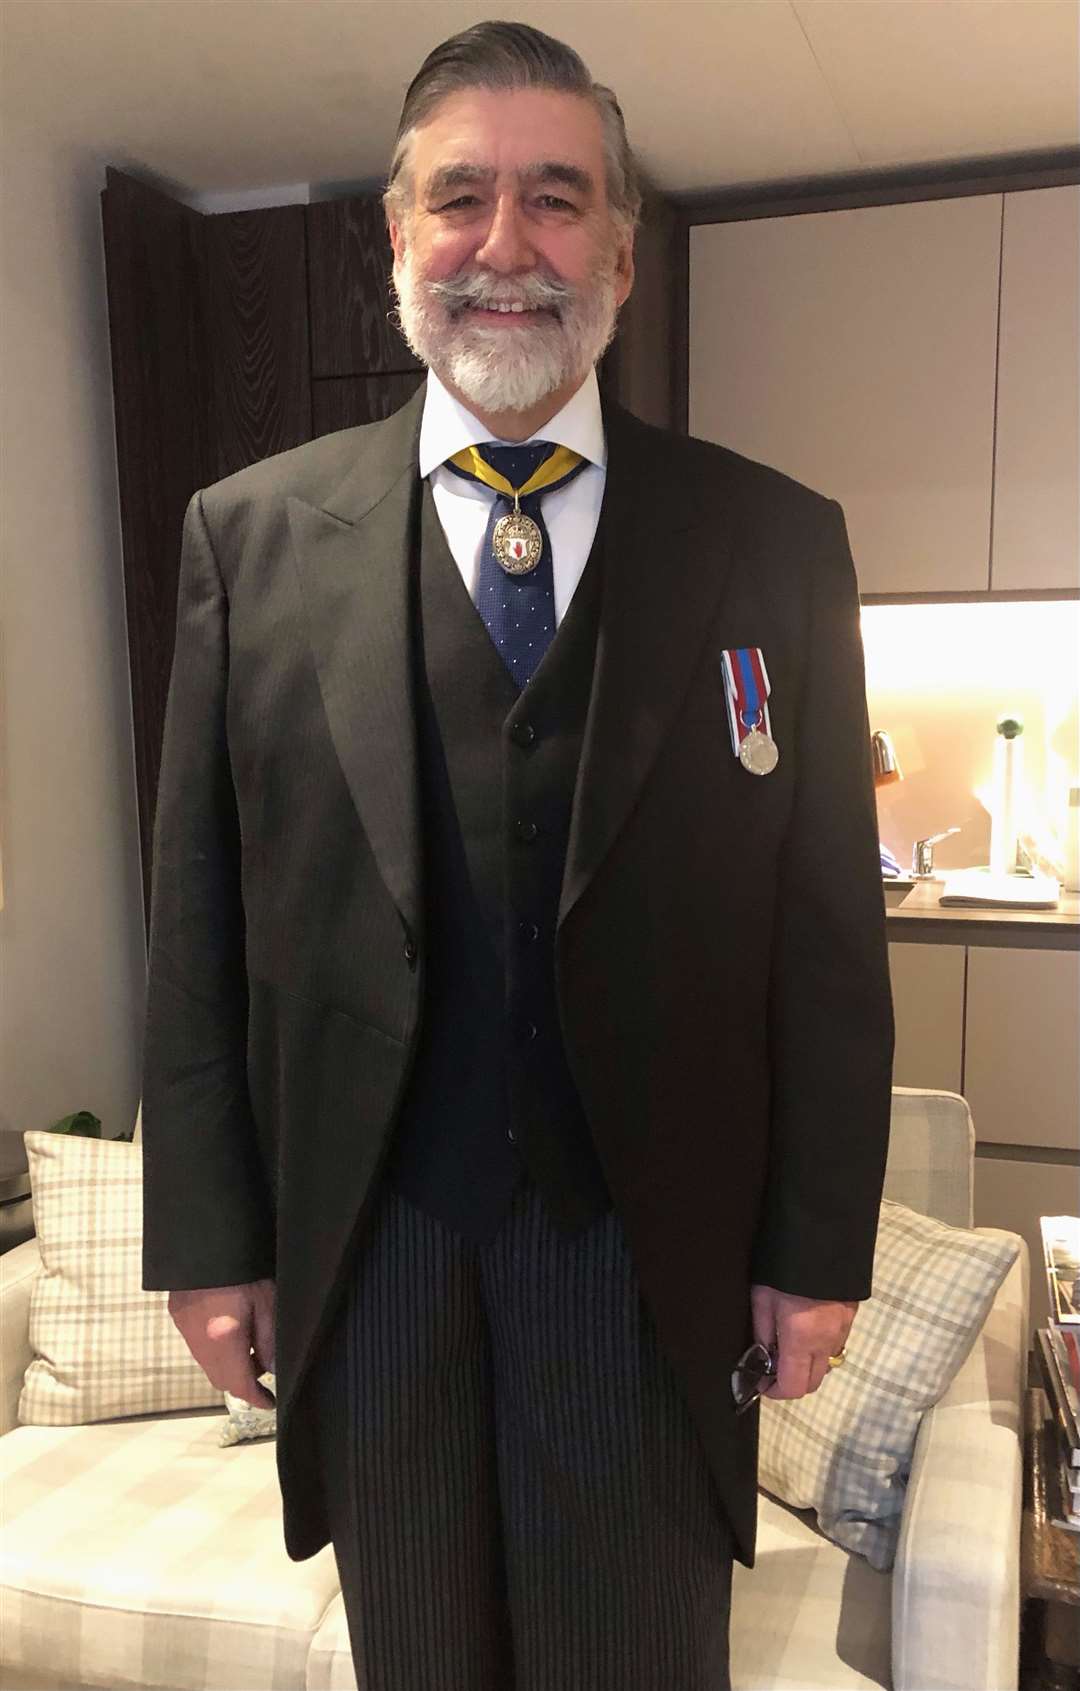 A snapshot of Lord Thurso taken by his wife Marion before he set off for Westminster Abbey.